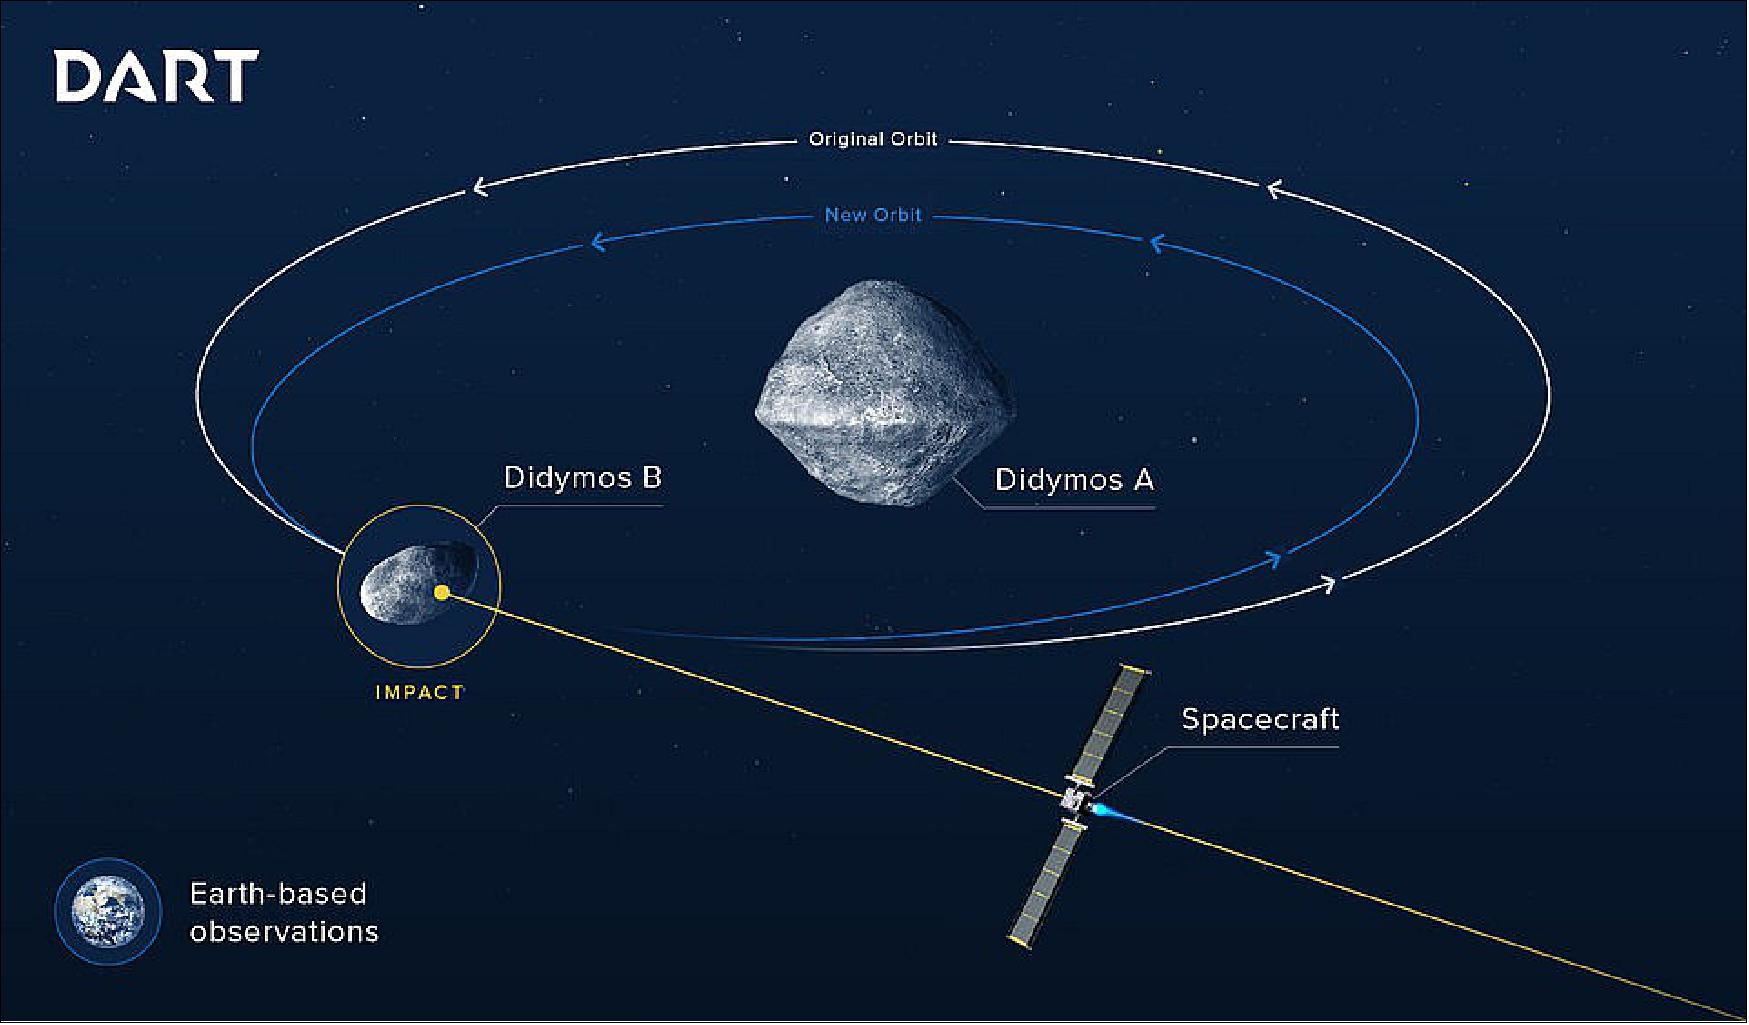 Figure 9: NASA's DART (Double Asteroid Redirect Test) mission is the US component of AIDA, intended to collide with the smaller of two bodies of the Didymos binary asteroid system. ESA's Hera mission will then perform follow-up post-impact observations (image credit: NASA/JHU/APL)